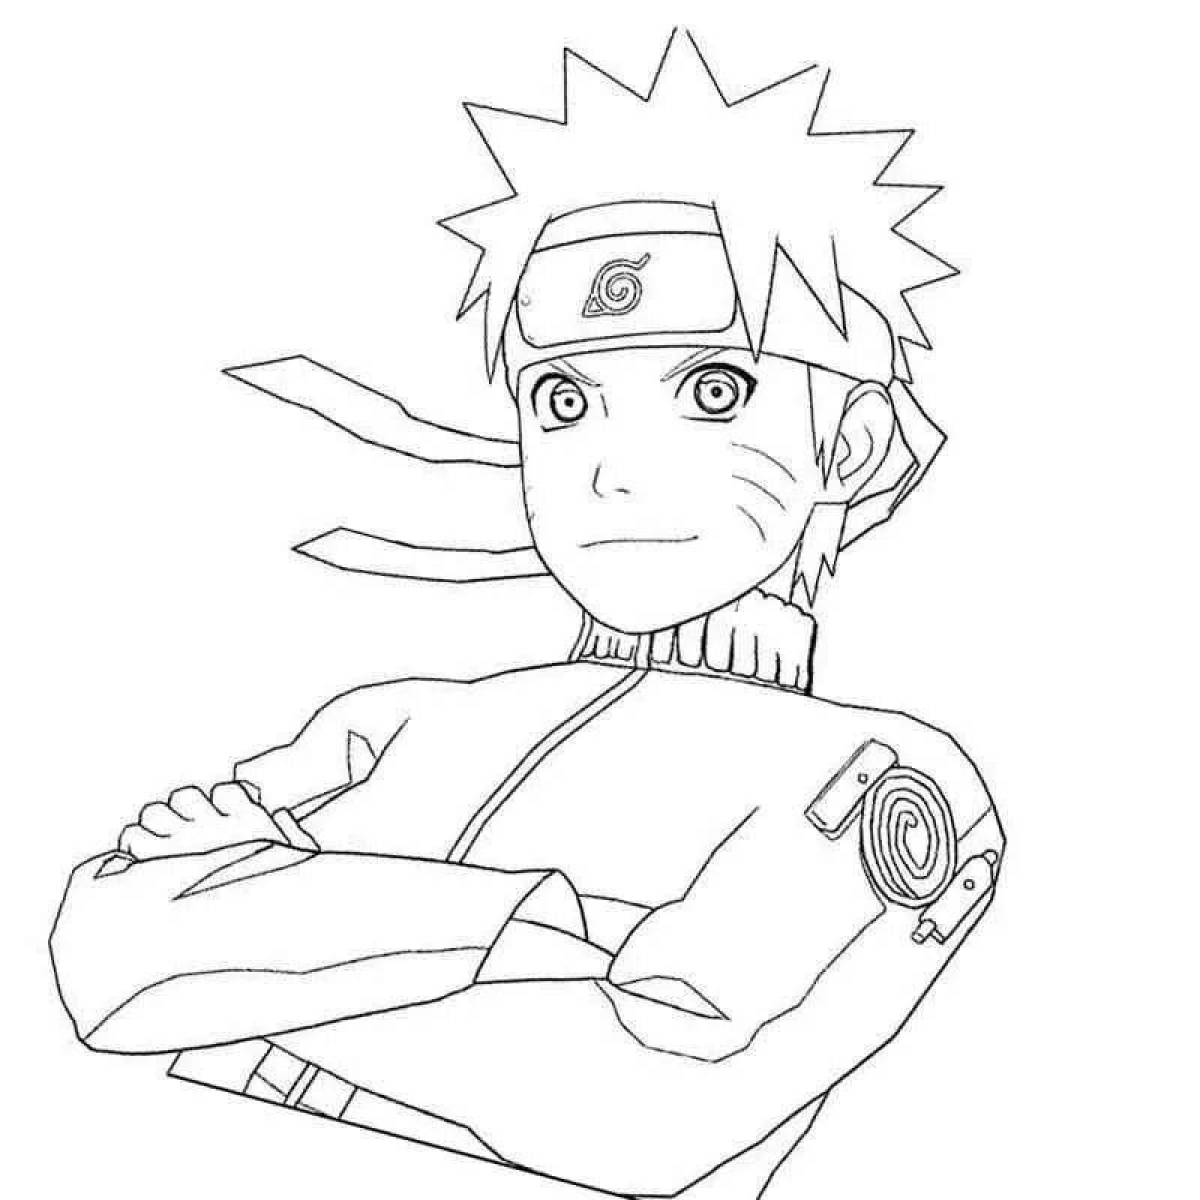 Naruto's tempting coloring book